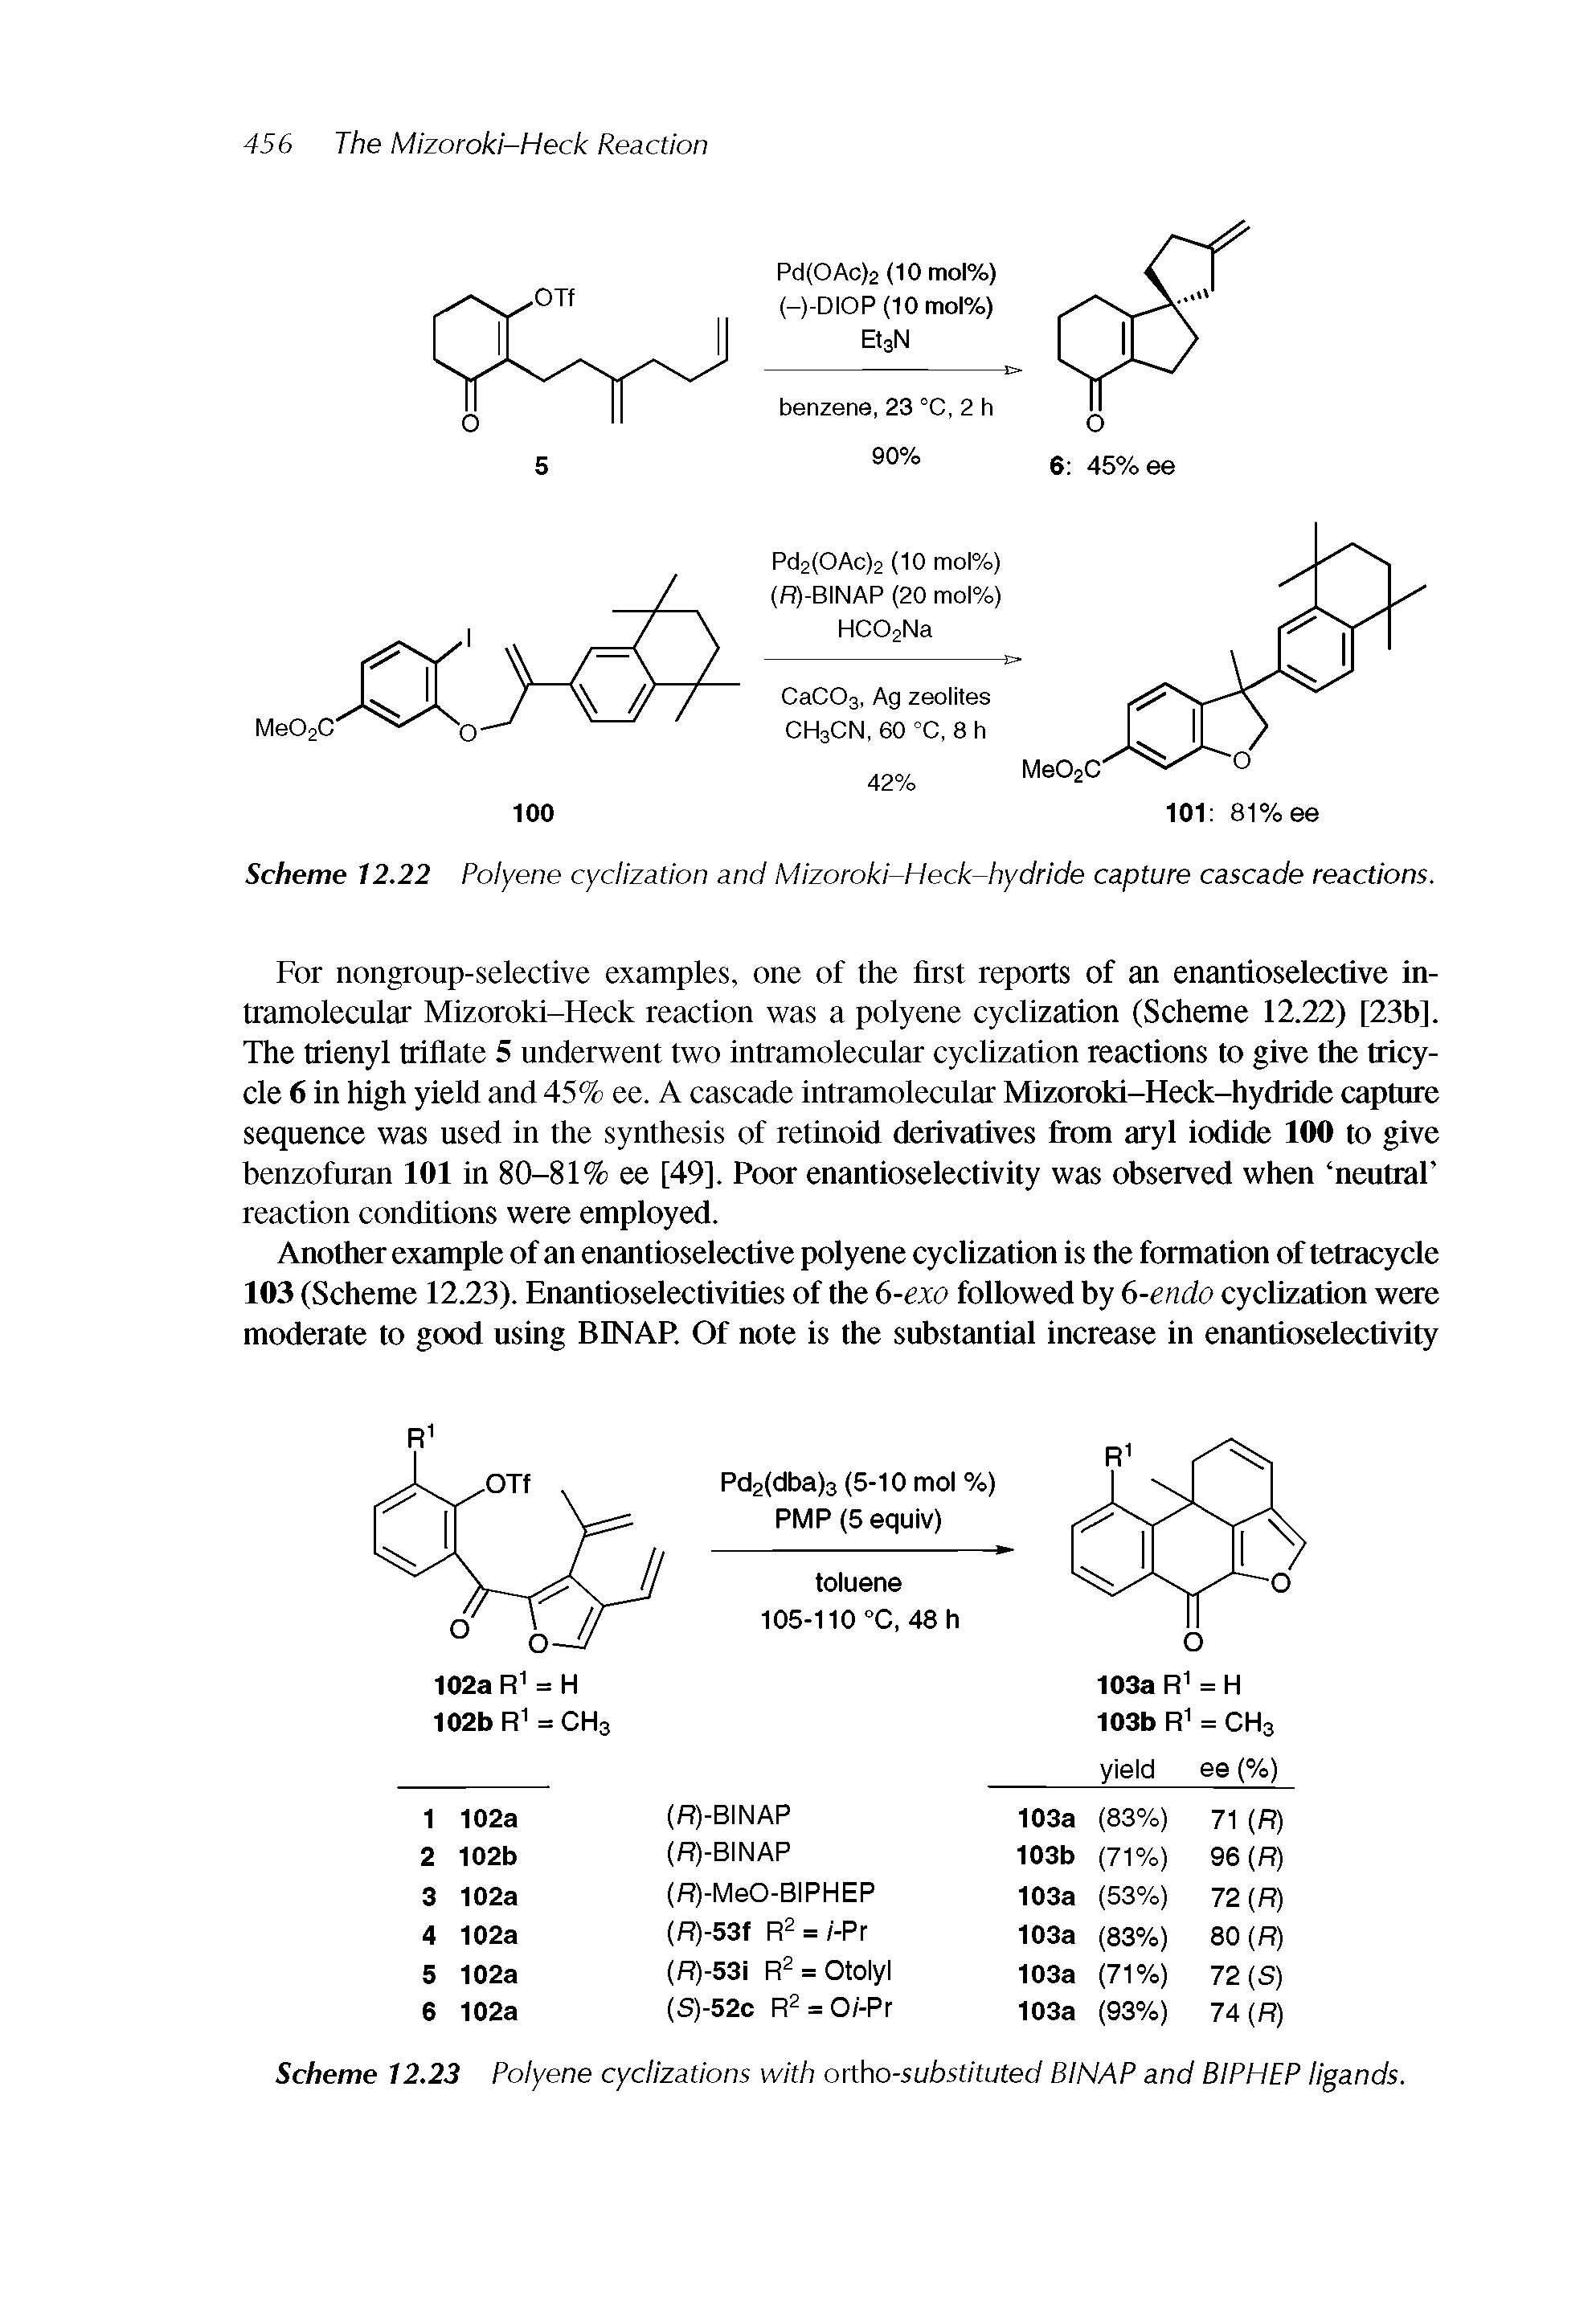 Scheme 12.23 Polyene cyclizations with ortho-substituted BINAP and BIPHEP ligands.